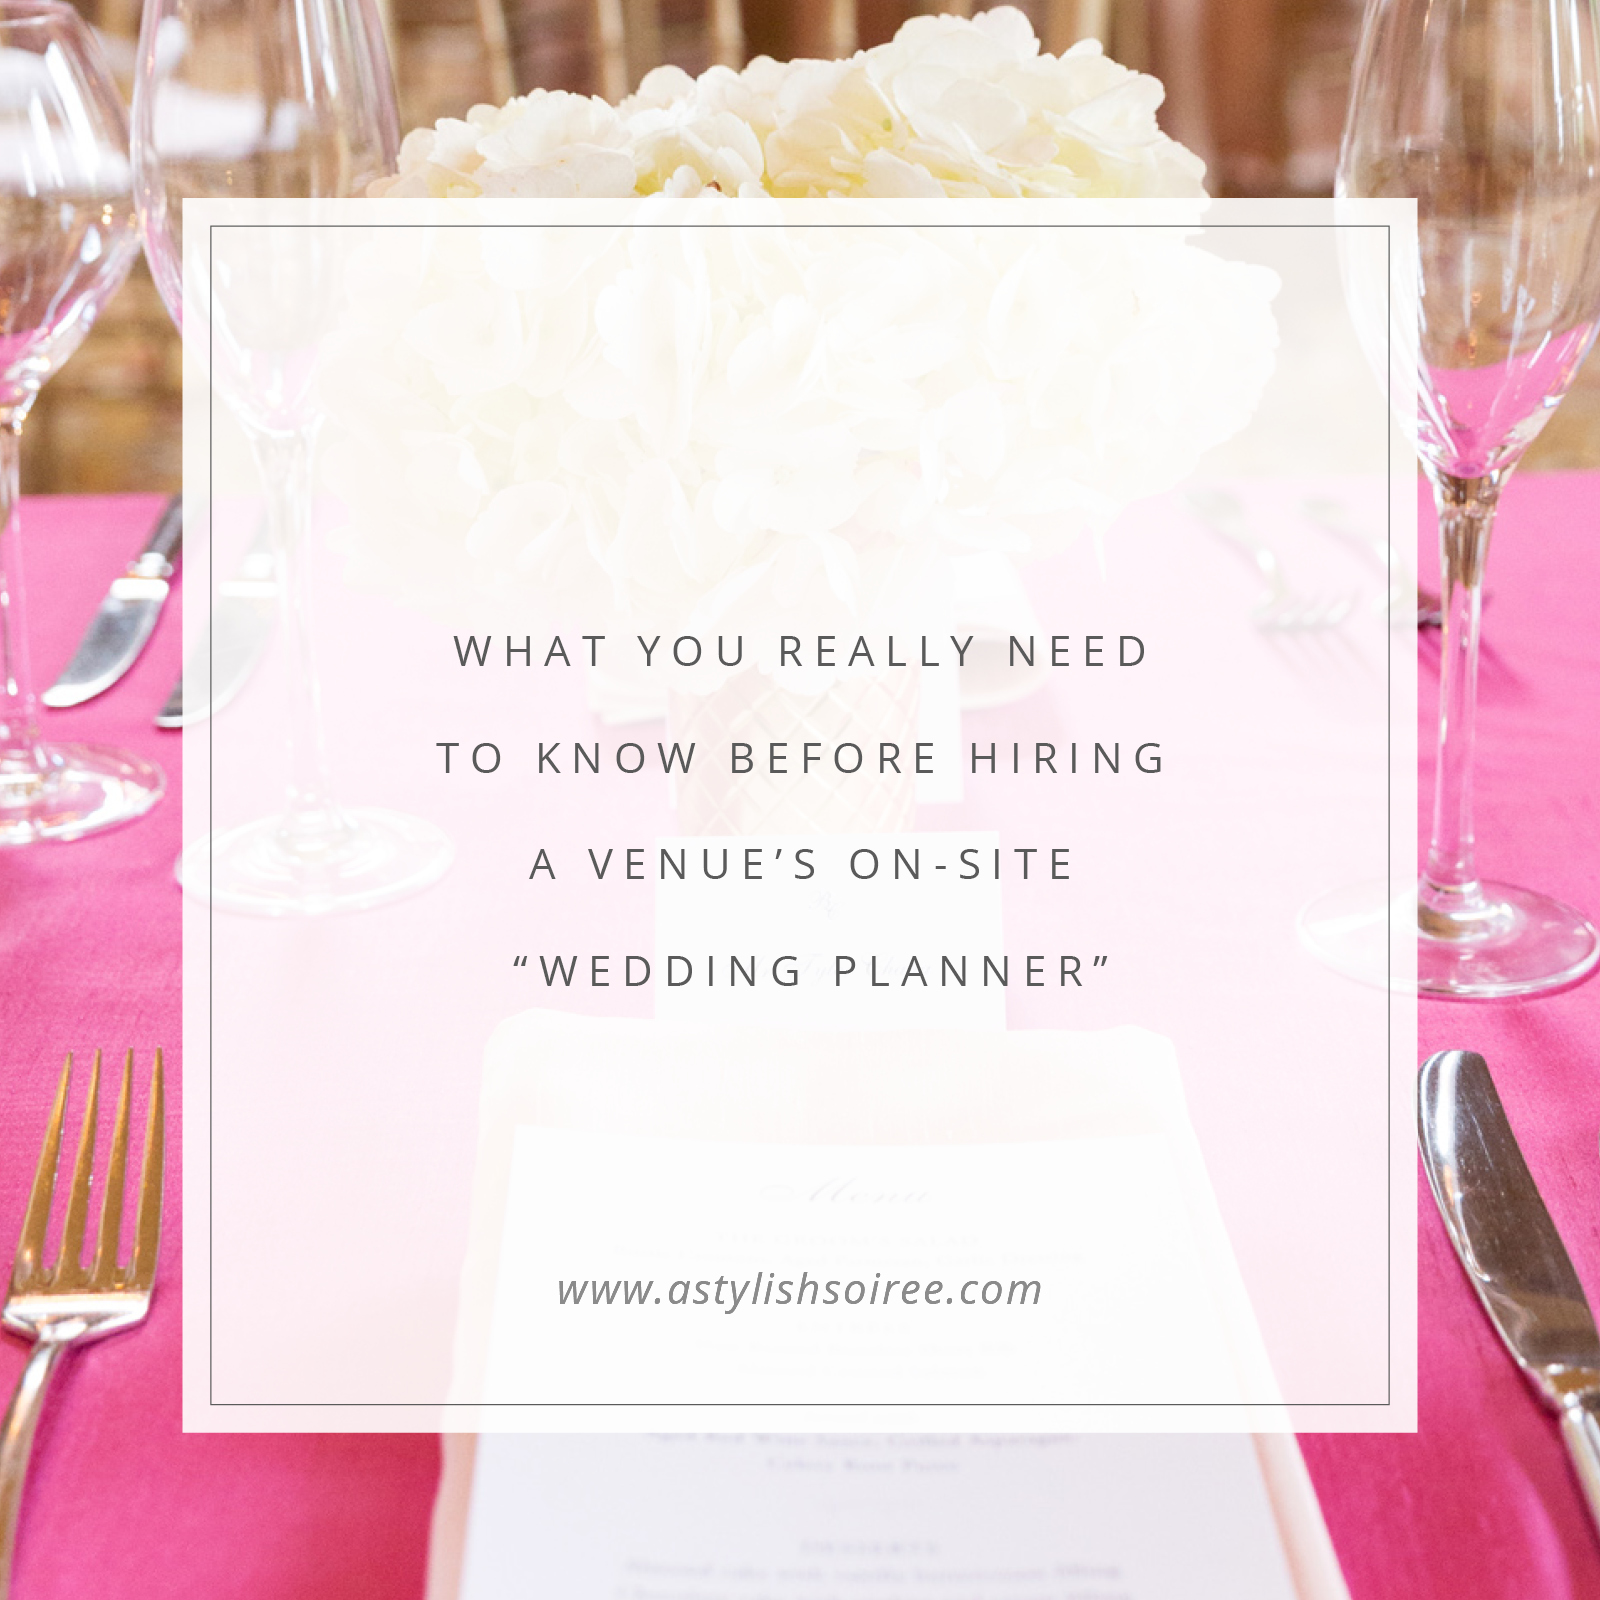 Wedding Planner vs Venue Coordinator: What you really need to know before hiring a venue's "On-Site Wedding Planner"